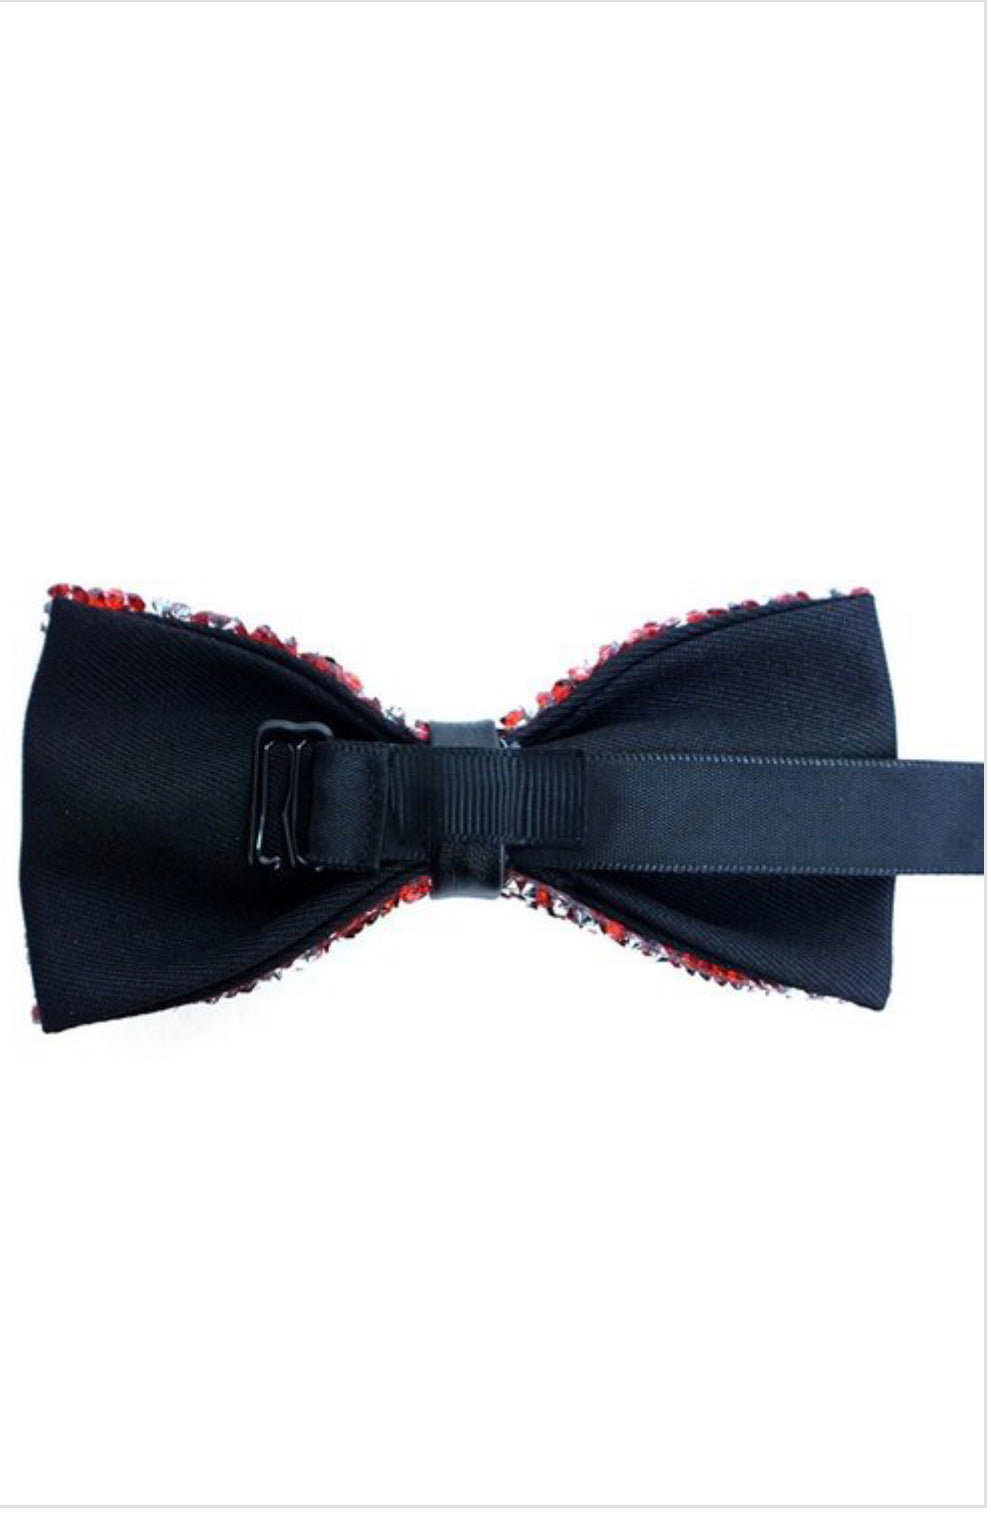 Red Sparkling Bow Tie